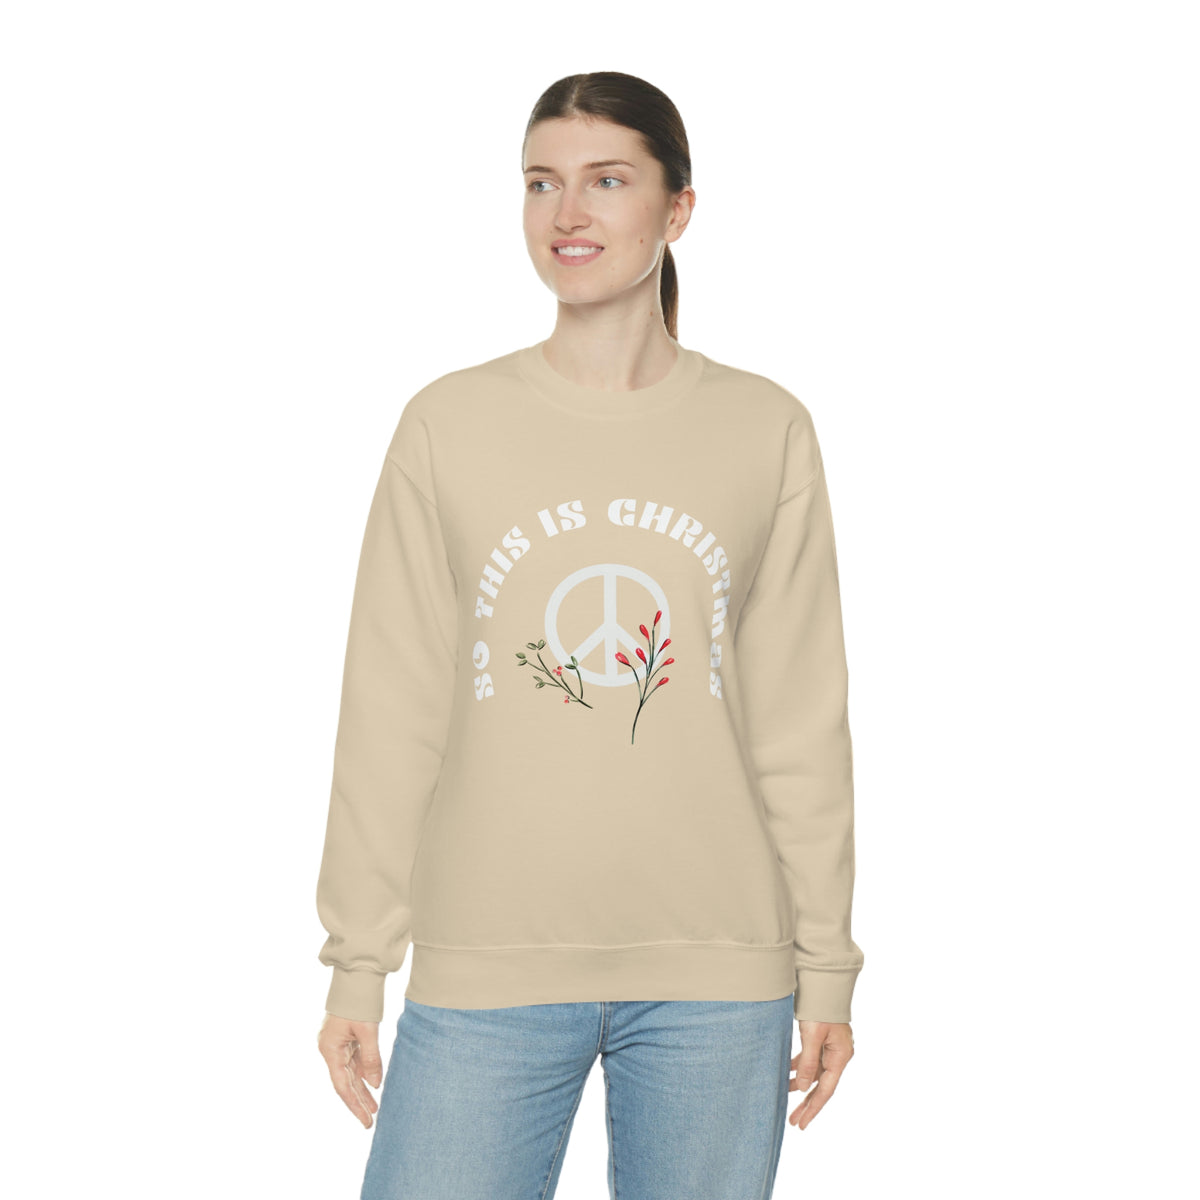 So This is Christmas Crewneck, John Lennon Holiday Sweatshirt, Gifts for Beatles Lovers, War is Over Top